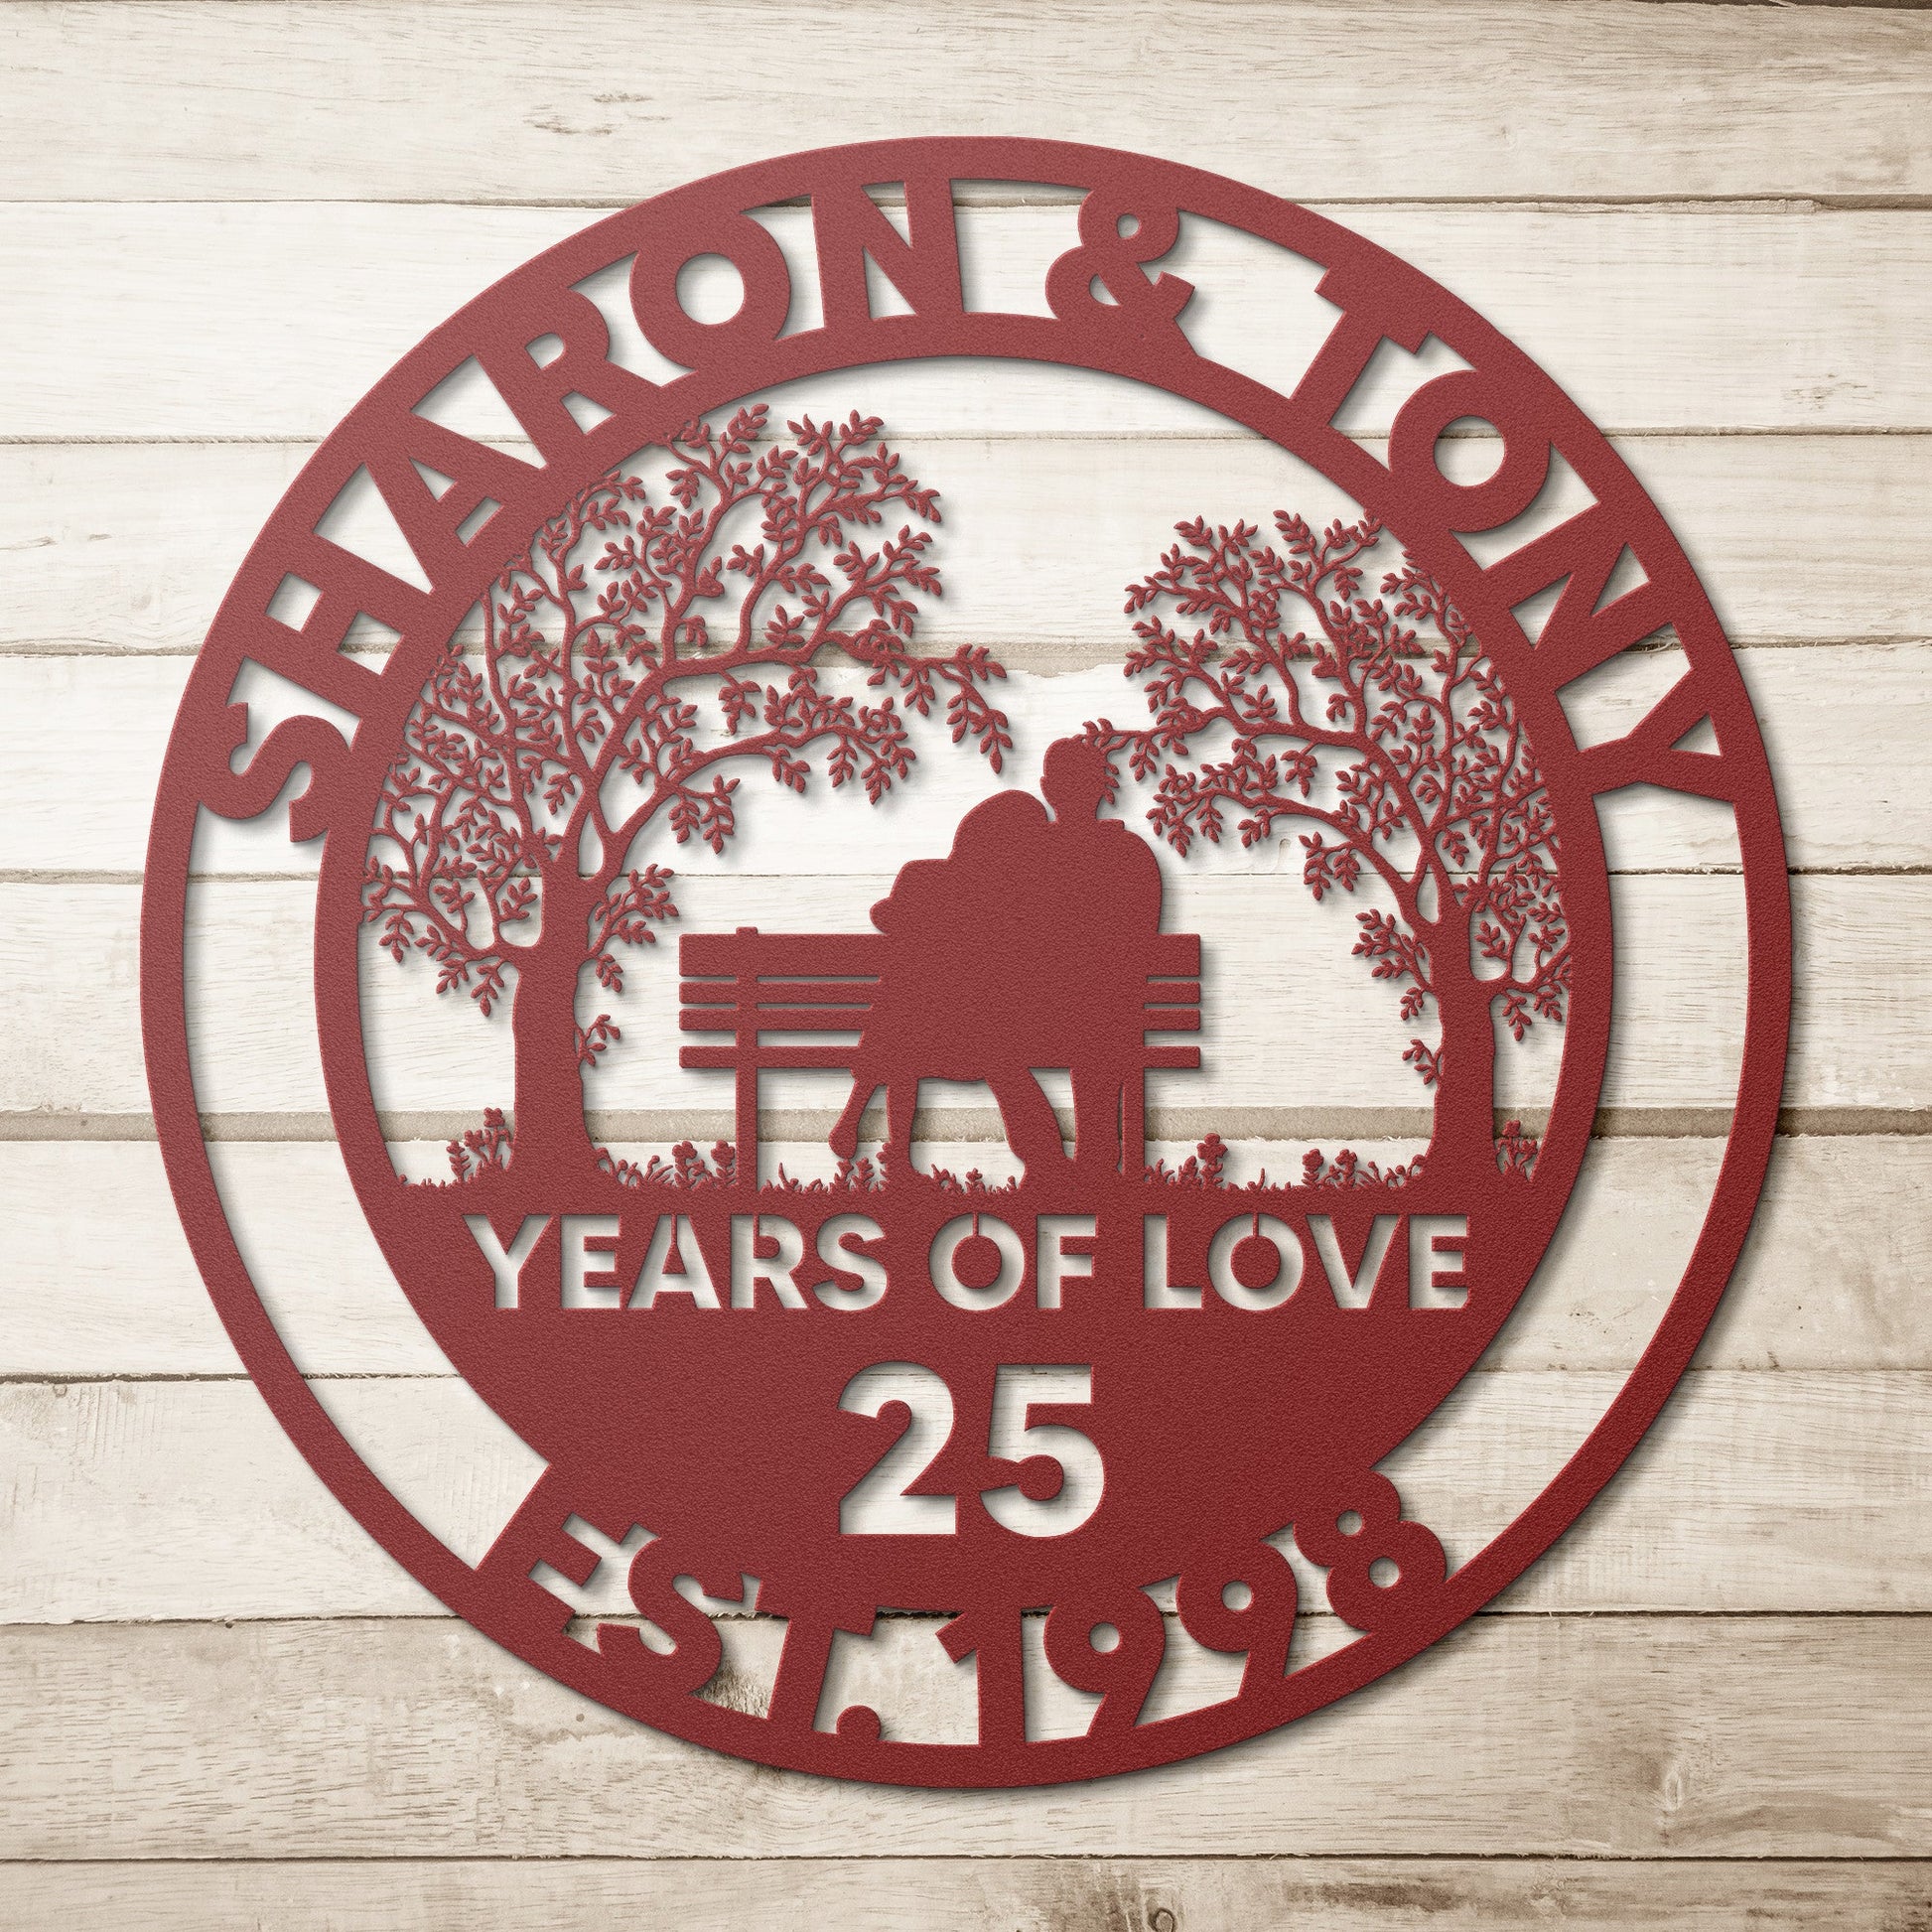 25th Wedding Anniversary Metal Sign: Timeless Love in a Customized Design - Stylinsoul